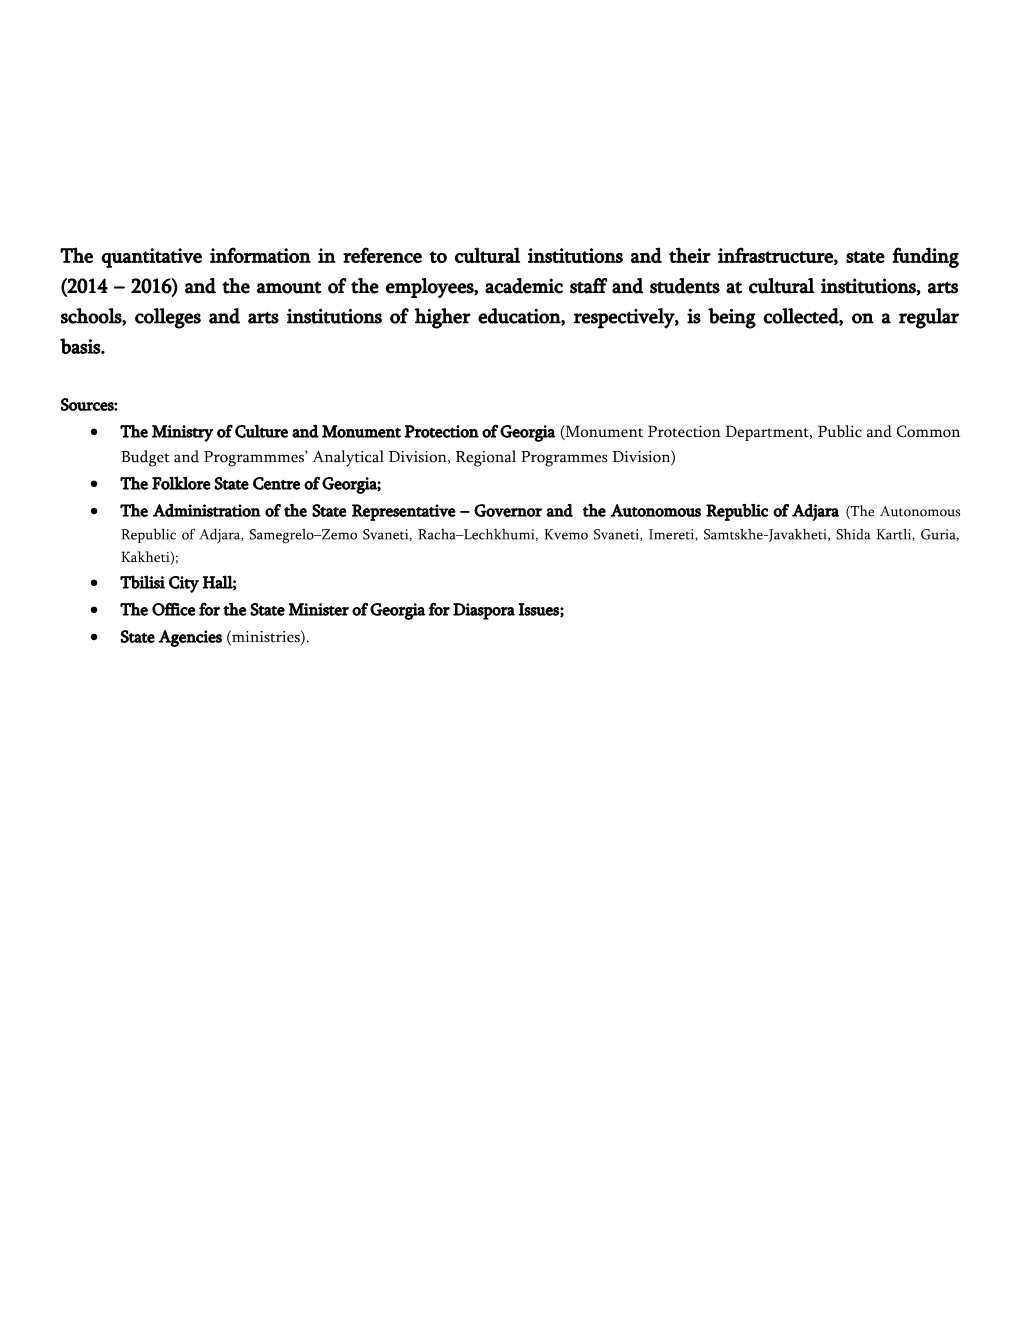 The Quantitative Information in Reference to Cultural Institutions Andtheir